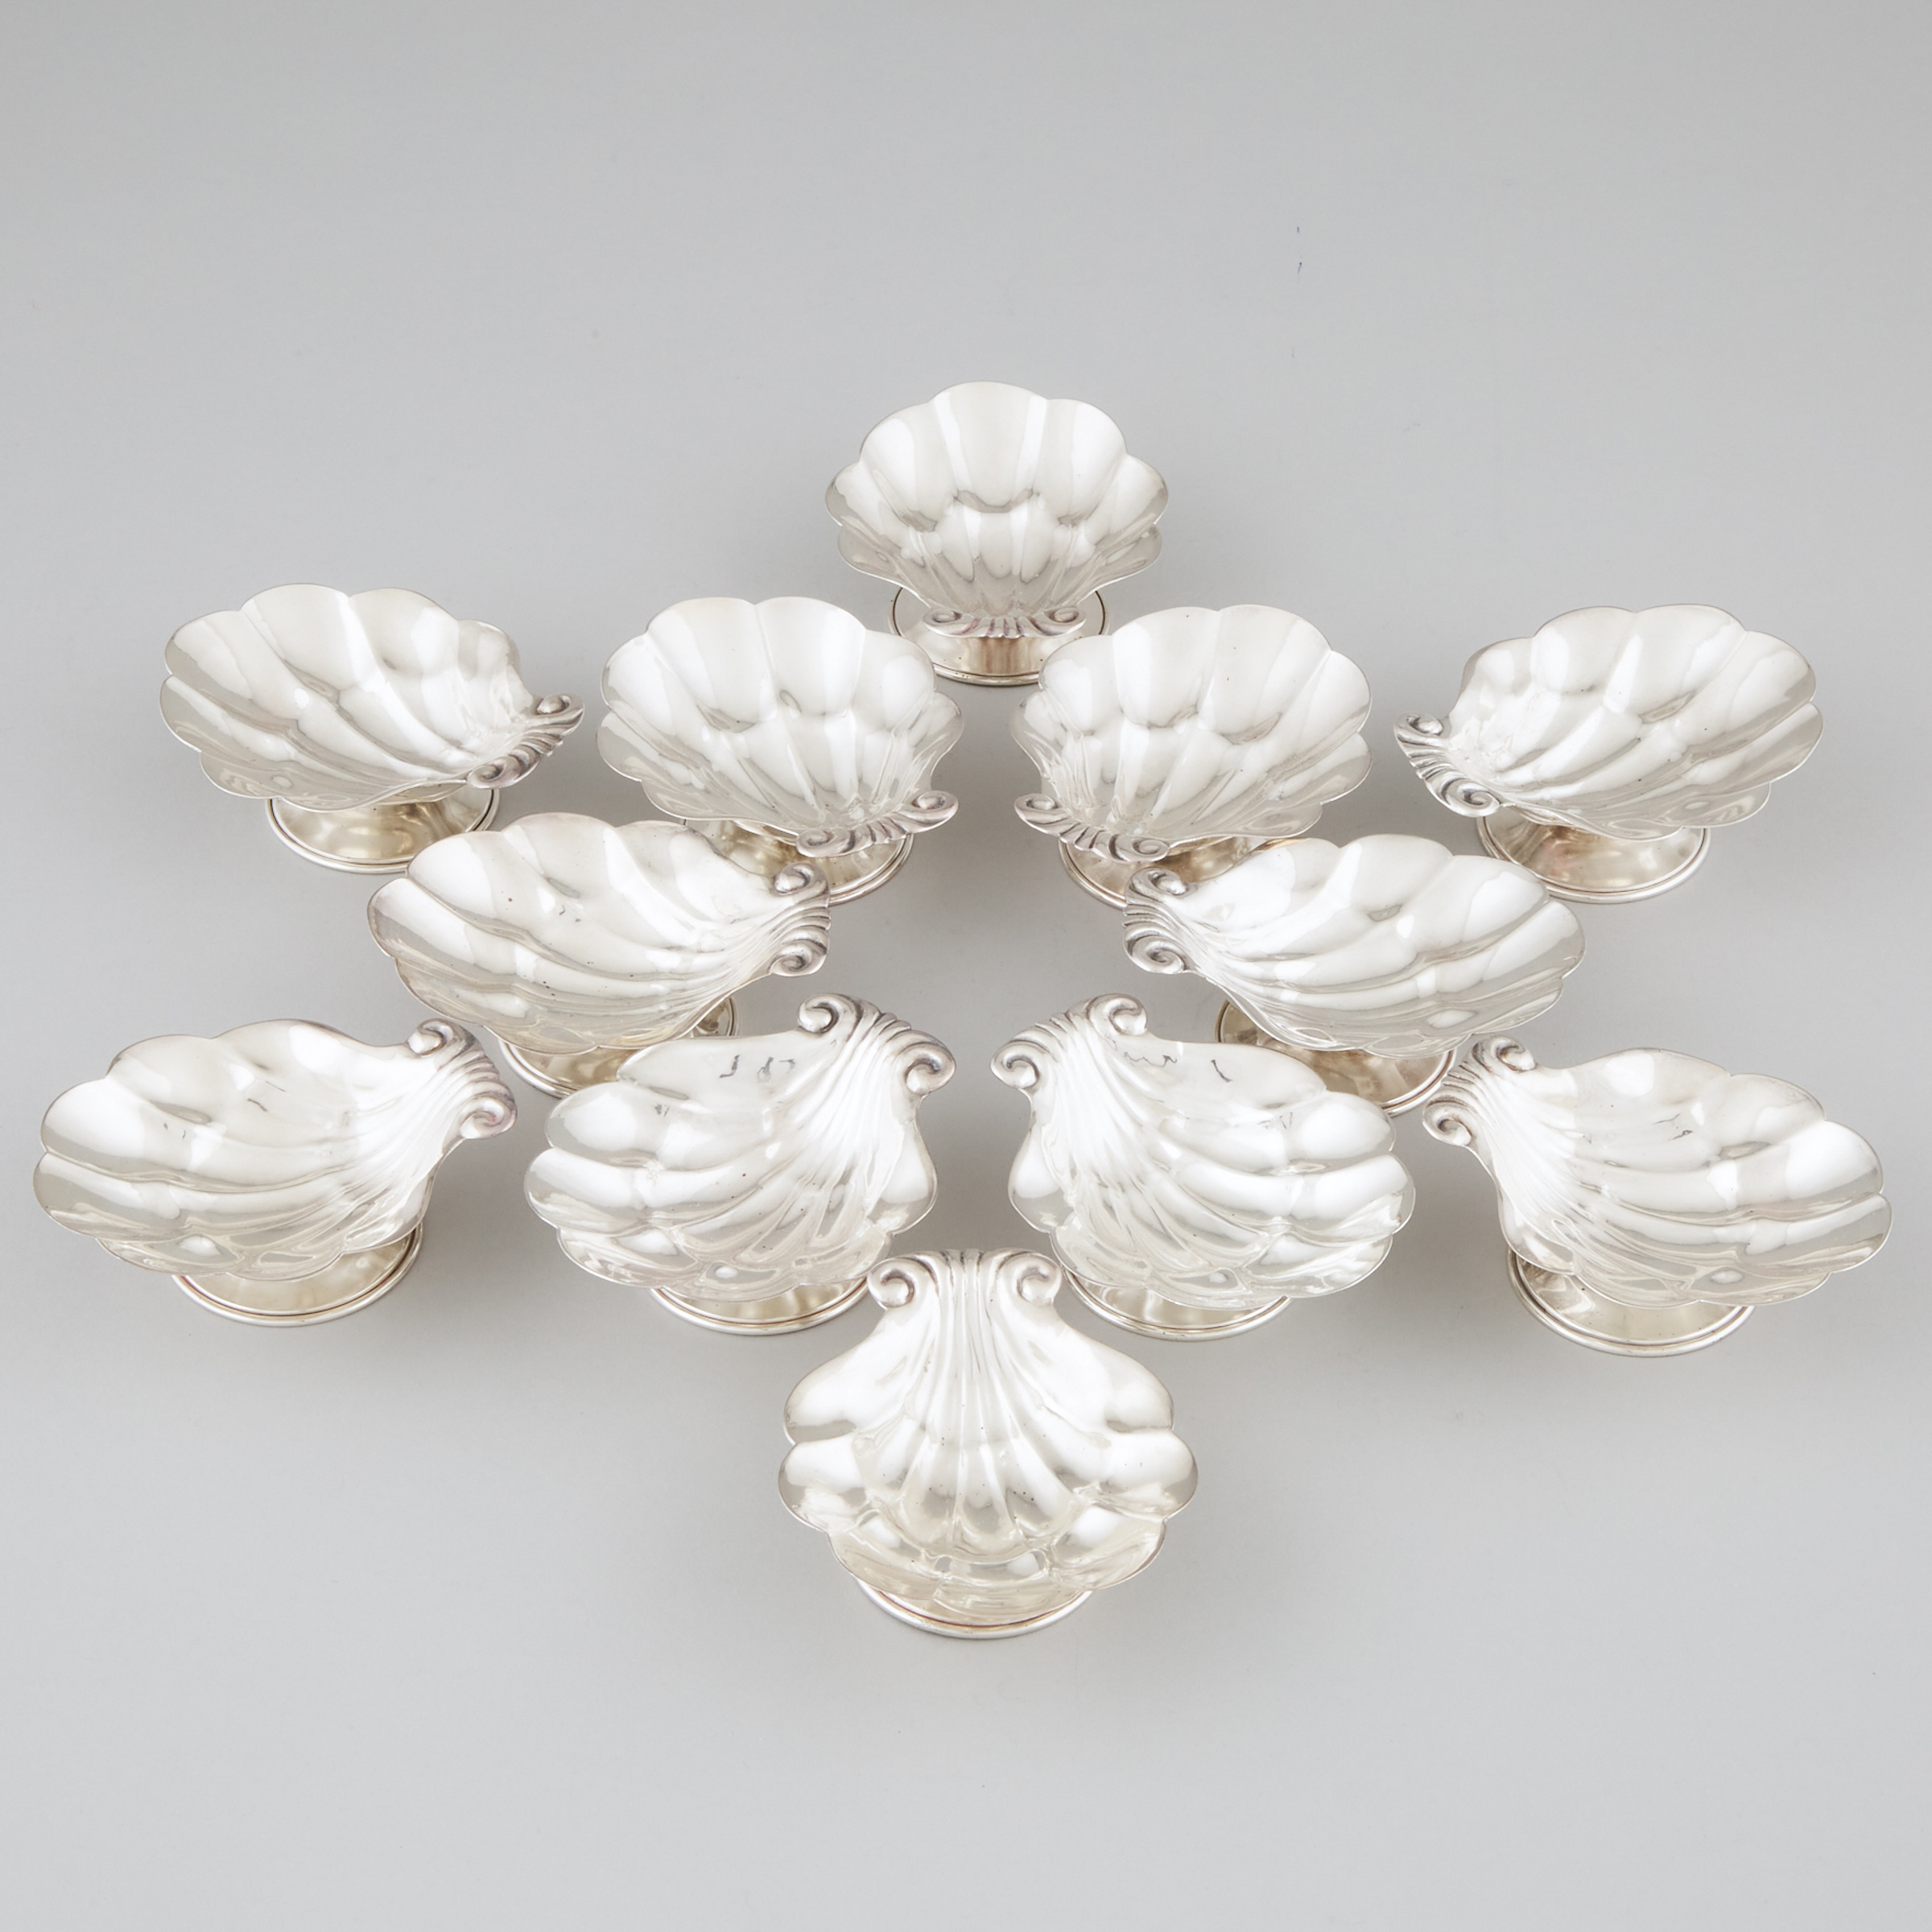 Twelve Canadian Silver Shell Shaped Nut Dishes, Carl Poul Petersen, Montreal, Que., mid-20th century